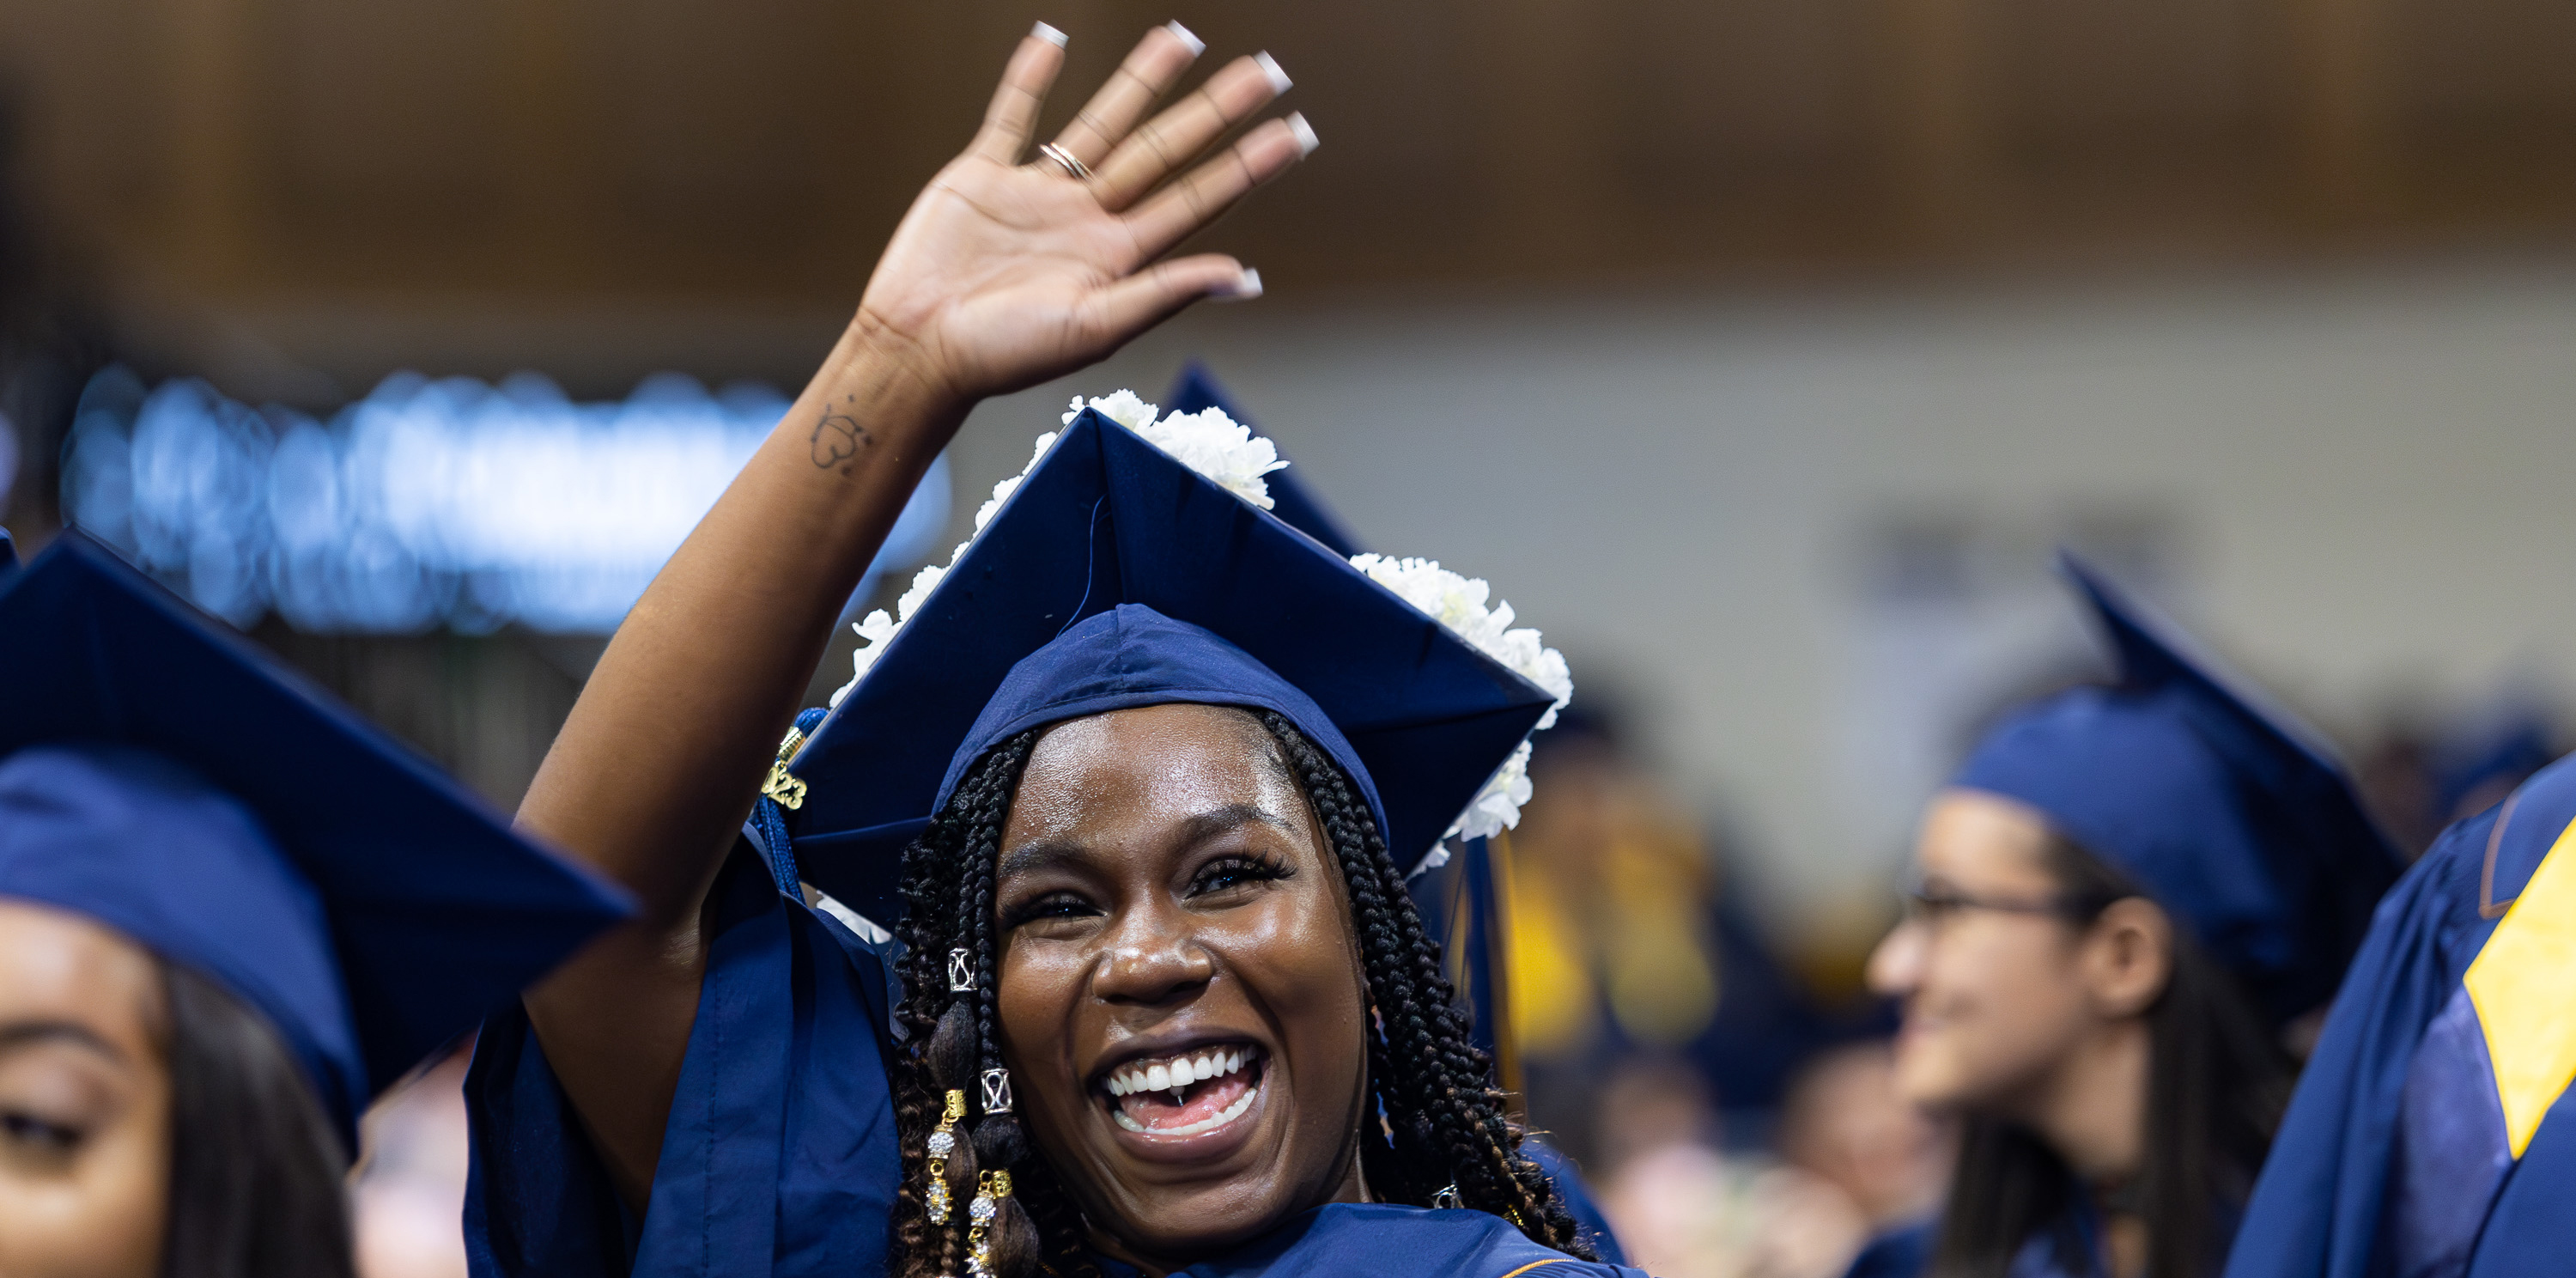 Female college student in her cap and gown at graduation, smiling and waving